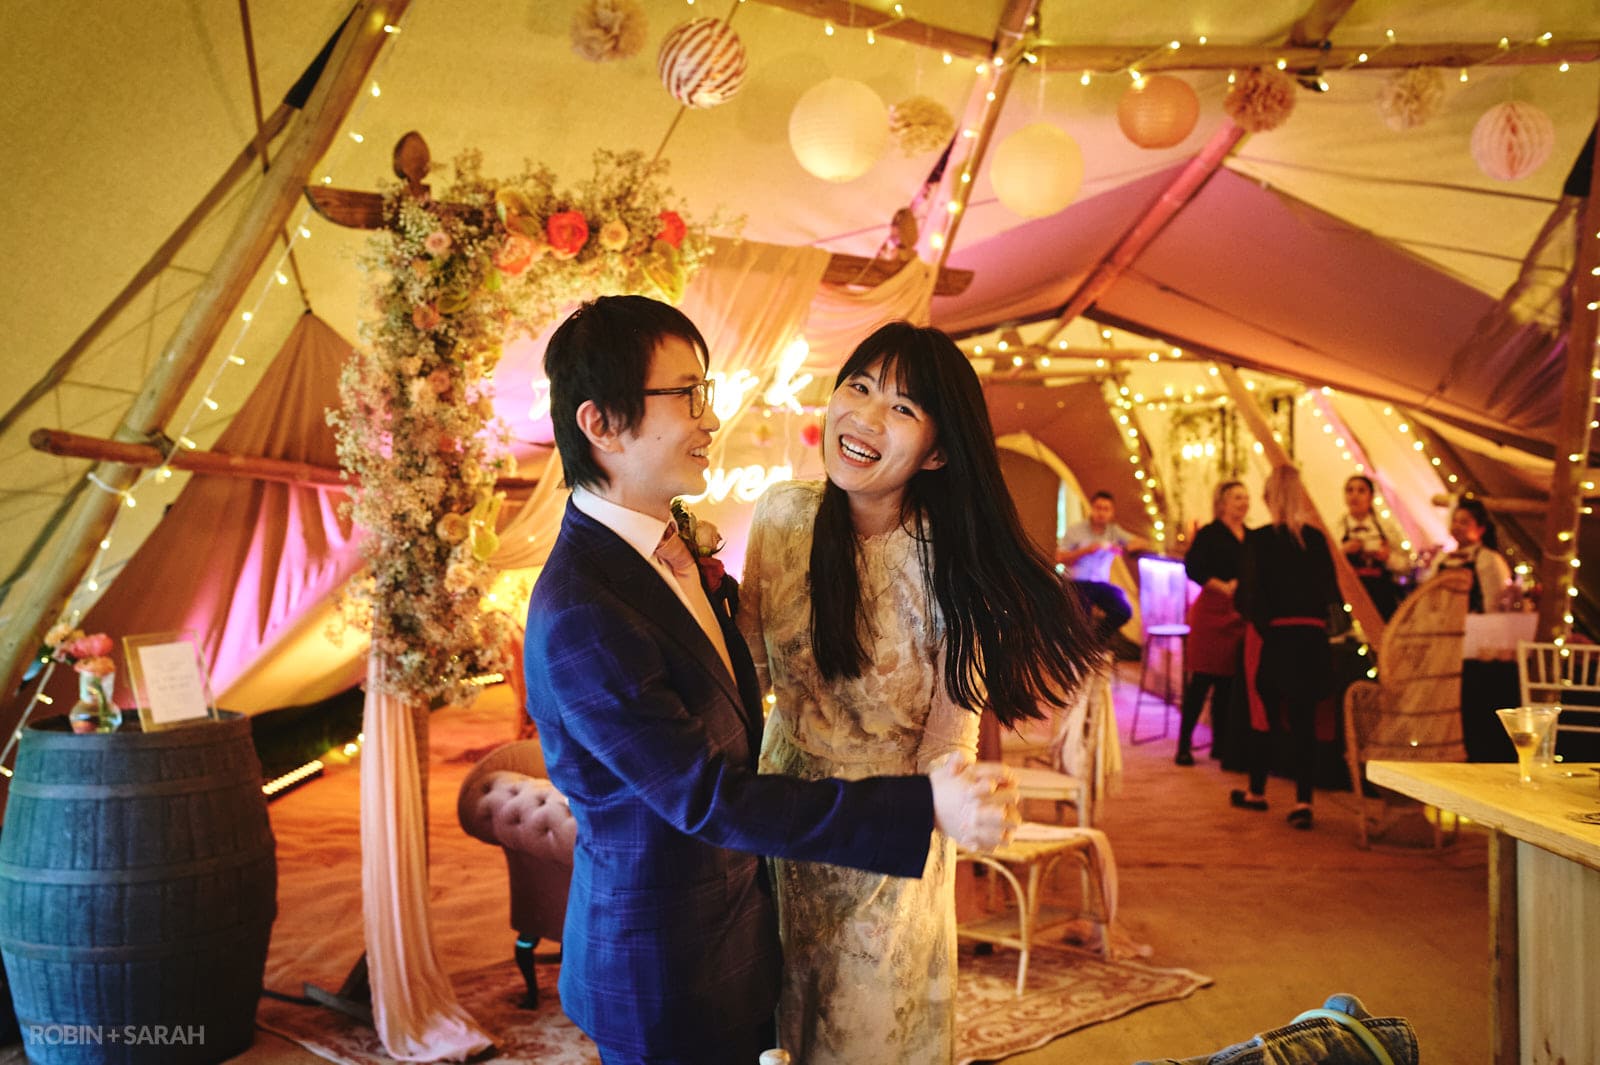 Evening wedding reception party in tipi